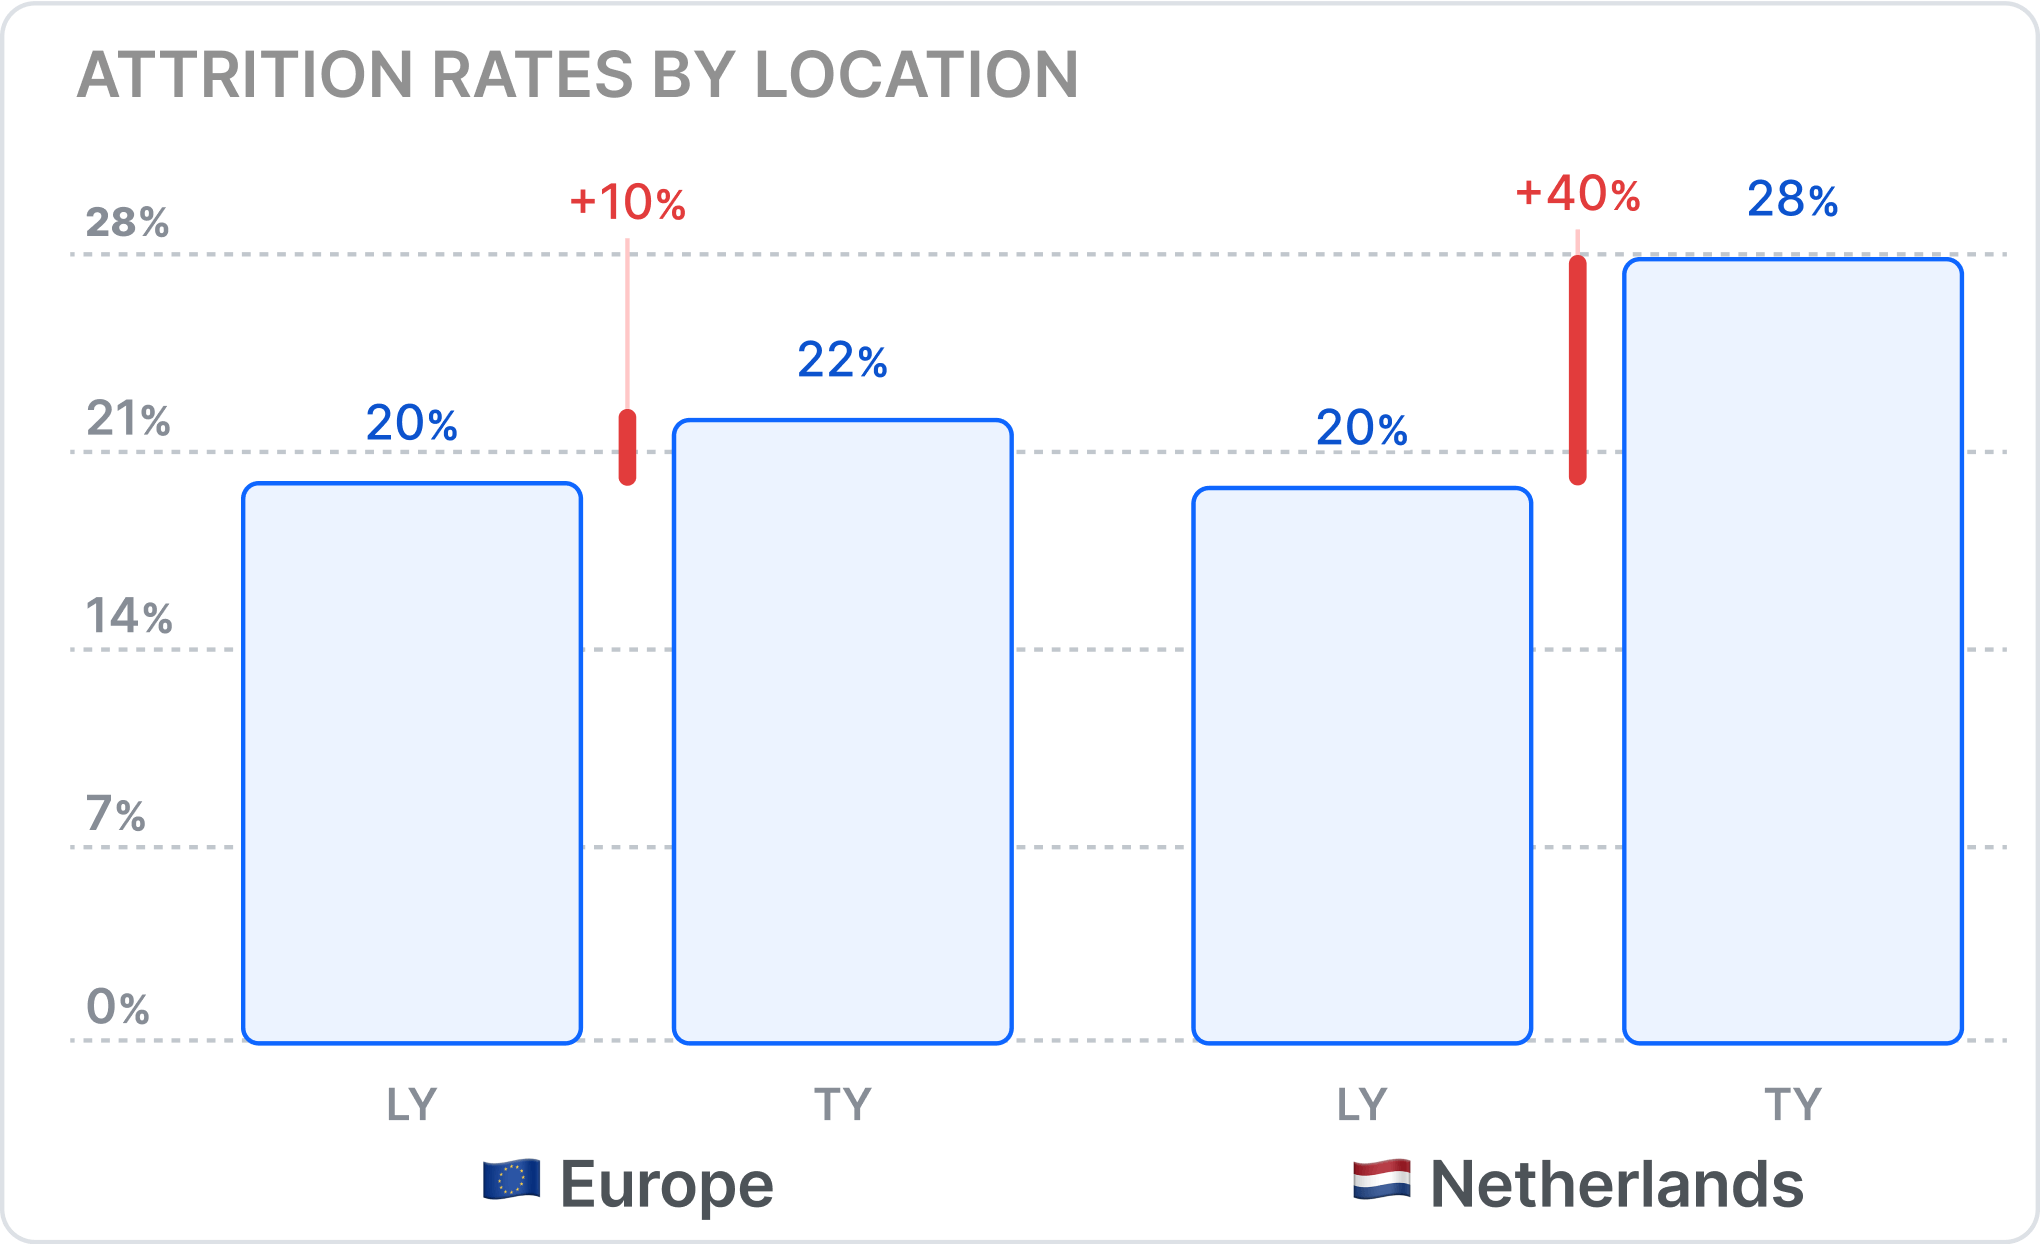 Attrition rates by location. Europe: last year 20%, this year 22%. Netherlands last year 20%, this year 28%.